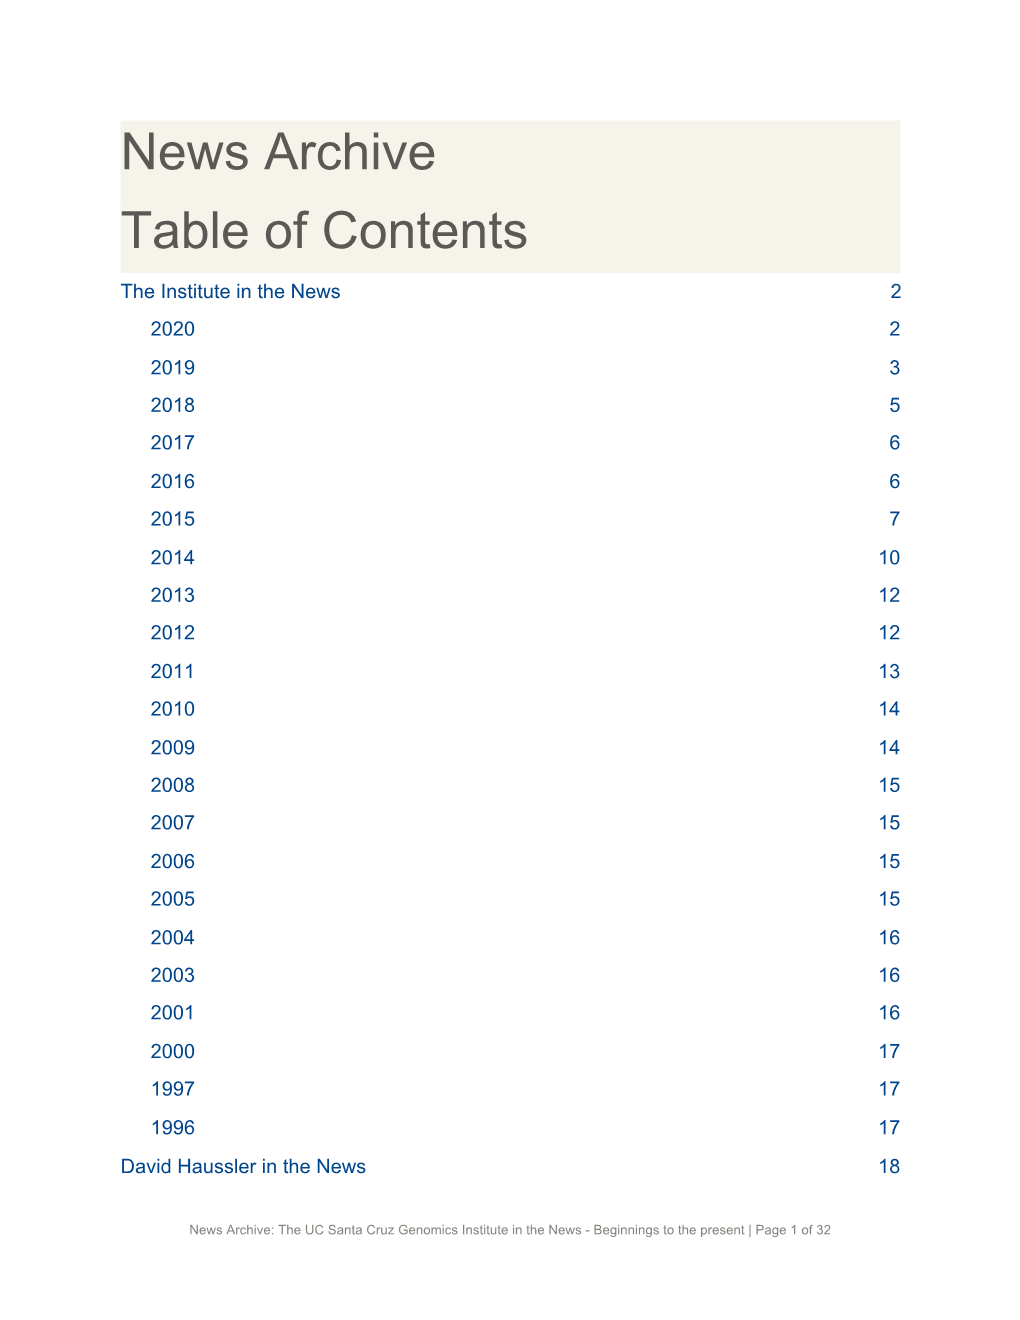 News Archive Table of Contents